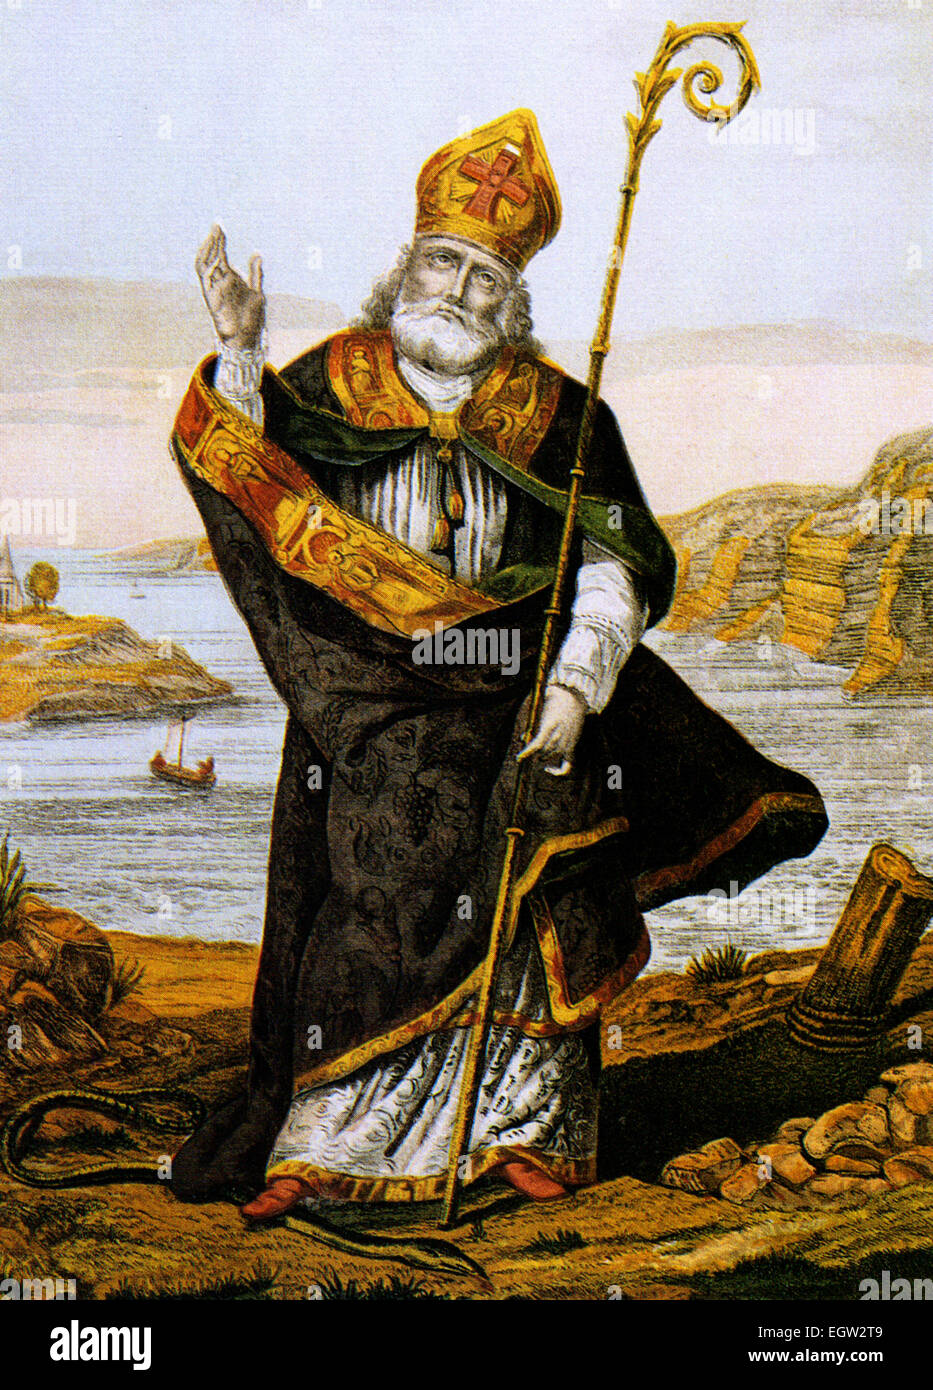 ST PATRICK Romano-British Christian missionary holding down a snake in an 18th century engraving Stock Photo